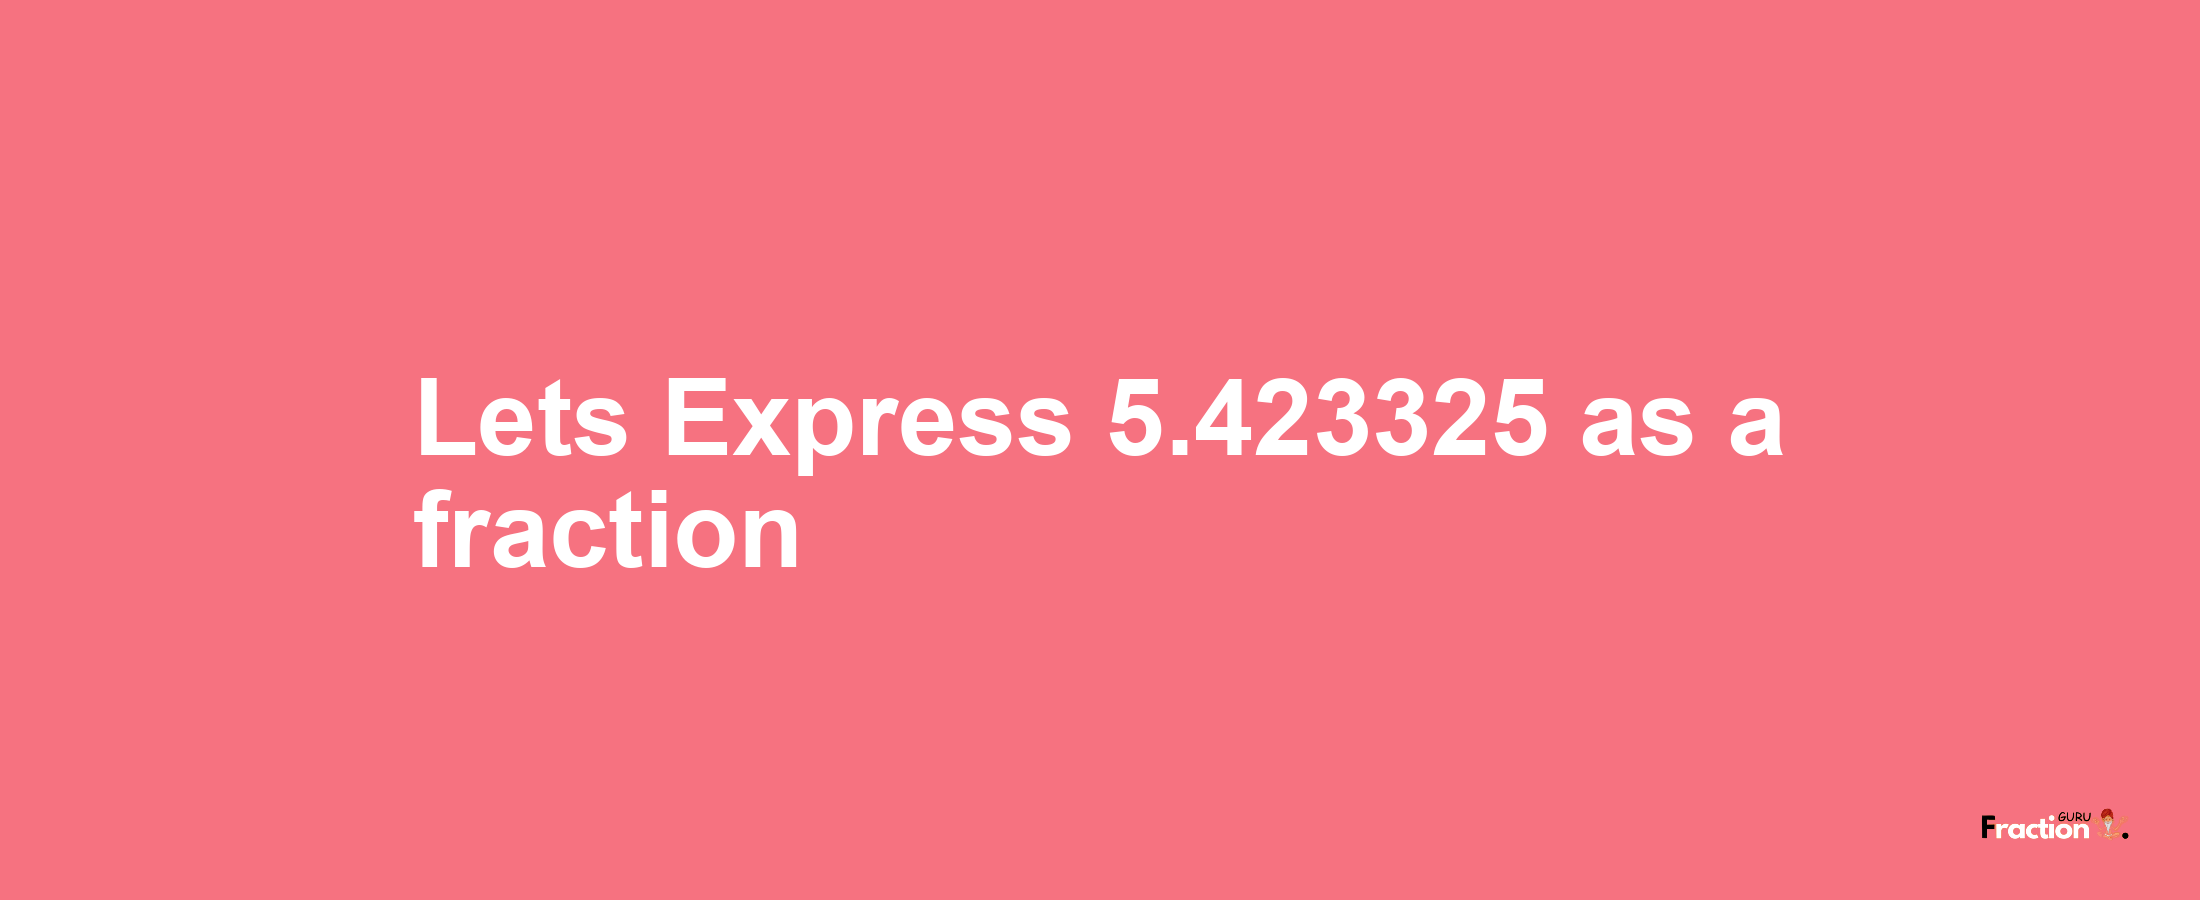 Lets Express 5.423325 as afraction